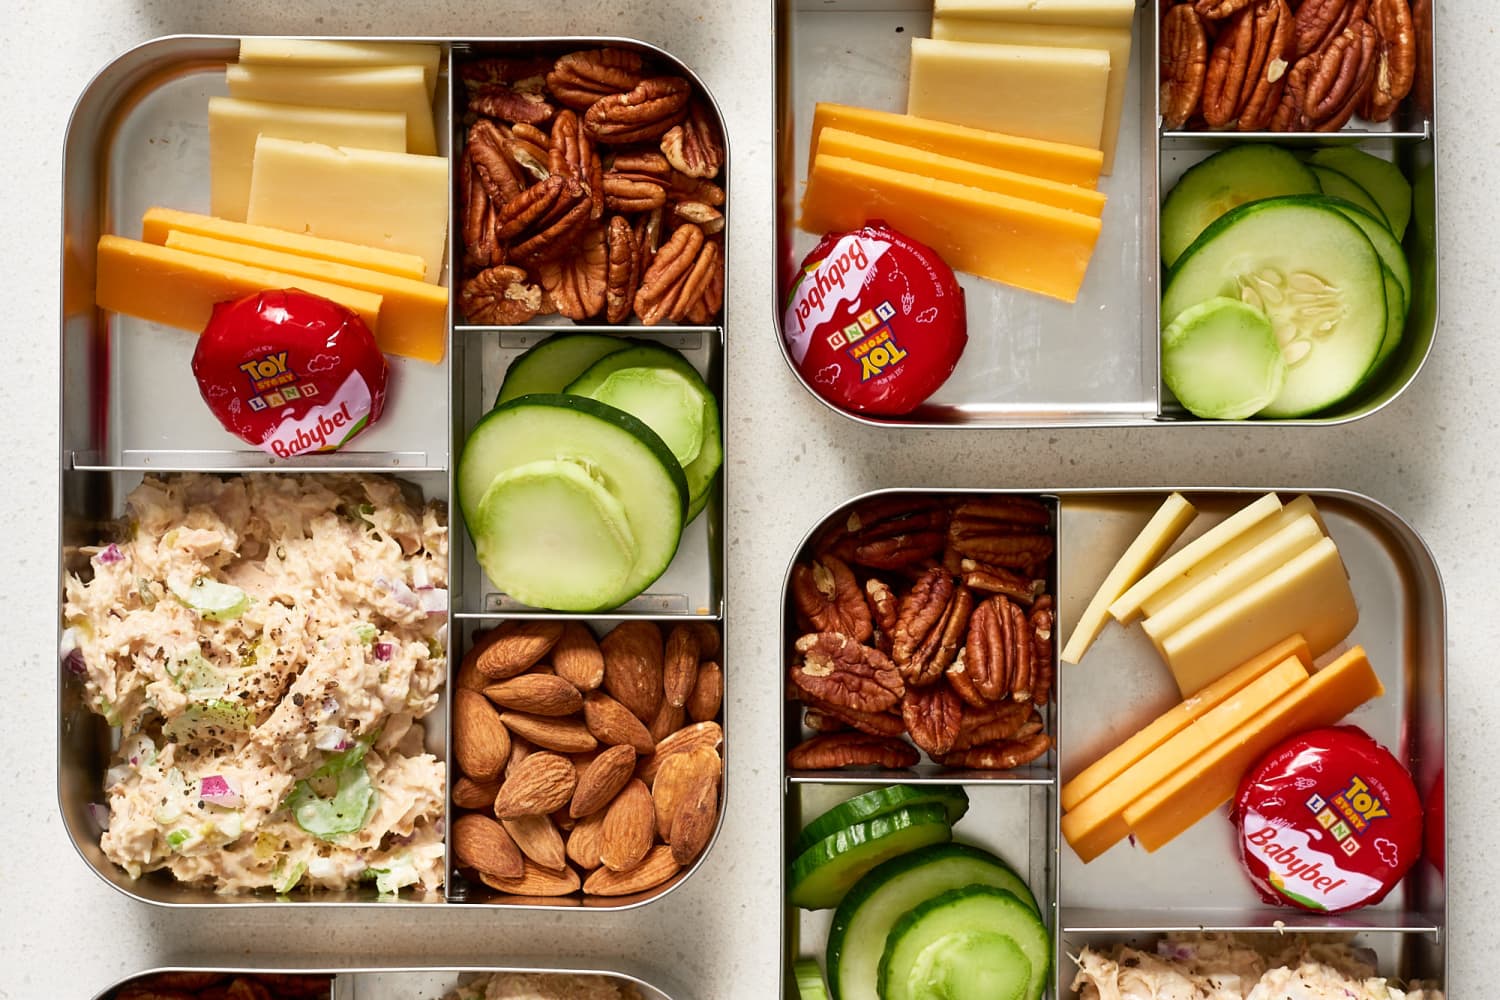 How To Pack Lunch For Work? 12 Tips for Packing Food